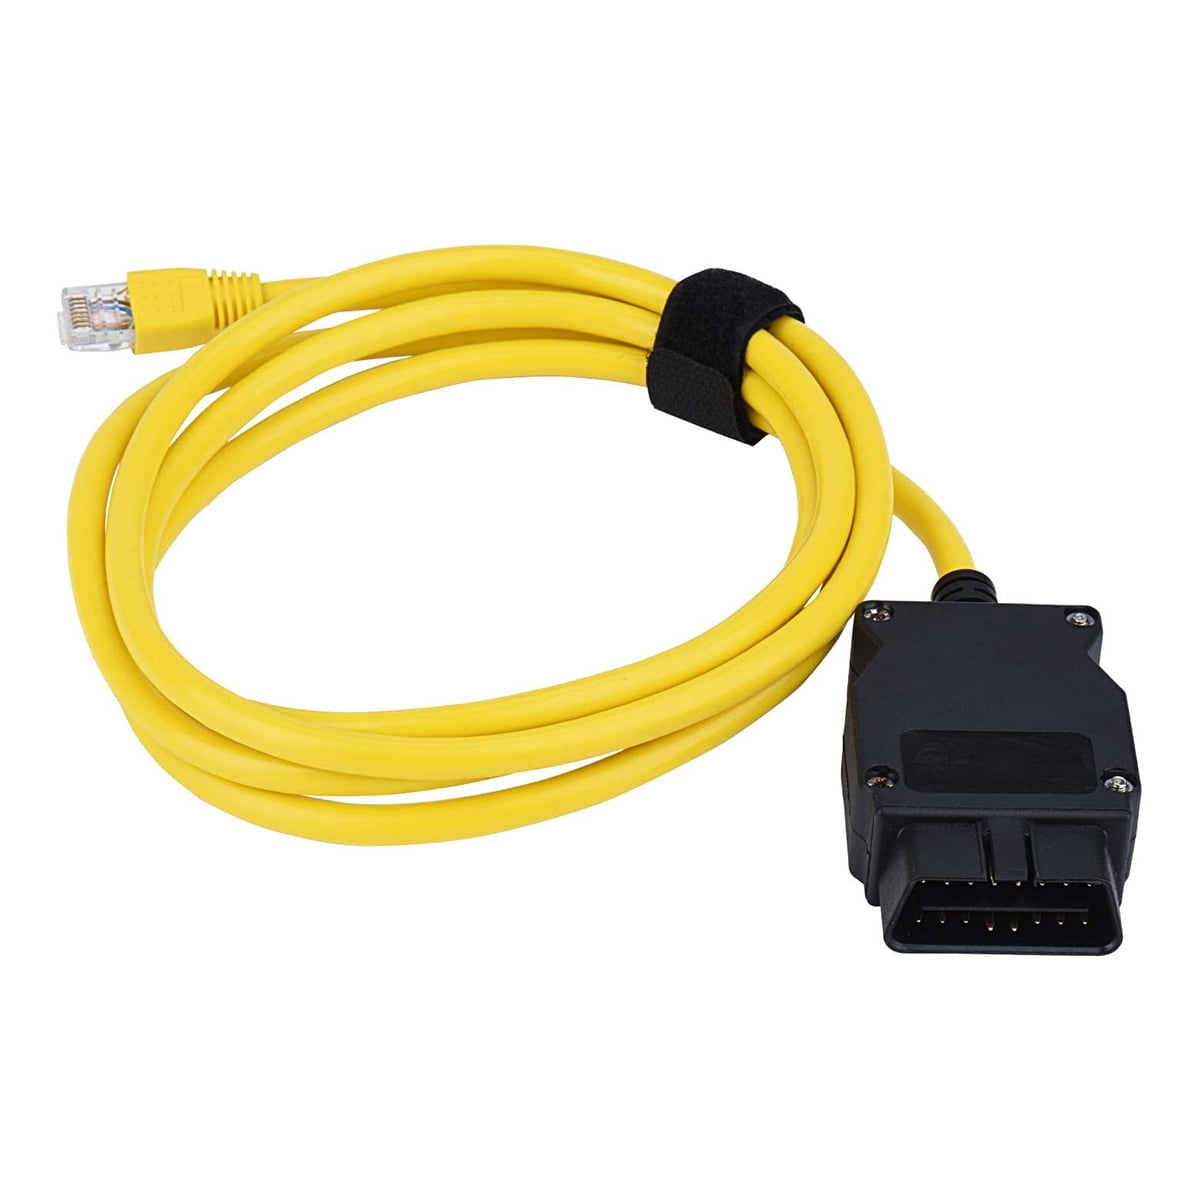 Toorise Ethernet to OBD Interface Cable for BMW Enet (Ethernet to Obd) Interface Cable E-SYS Icom Coding F-Series 6.5ft Ethernet to OBD Interface Car